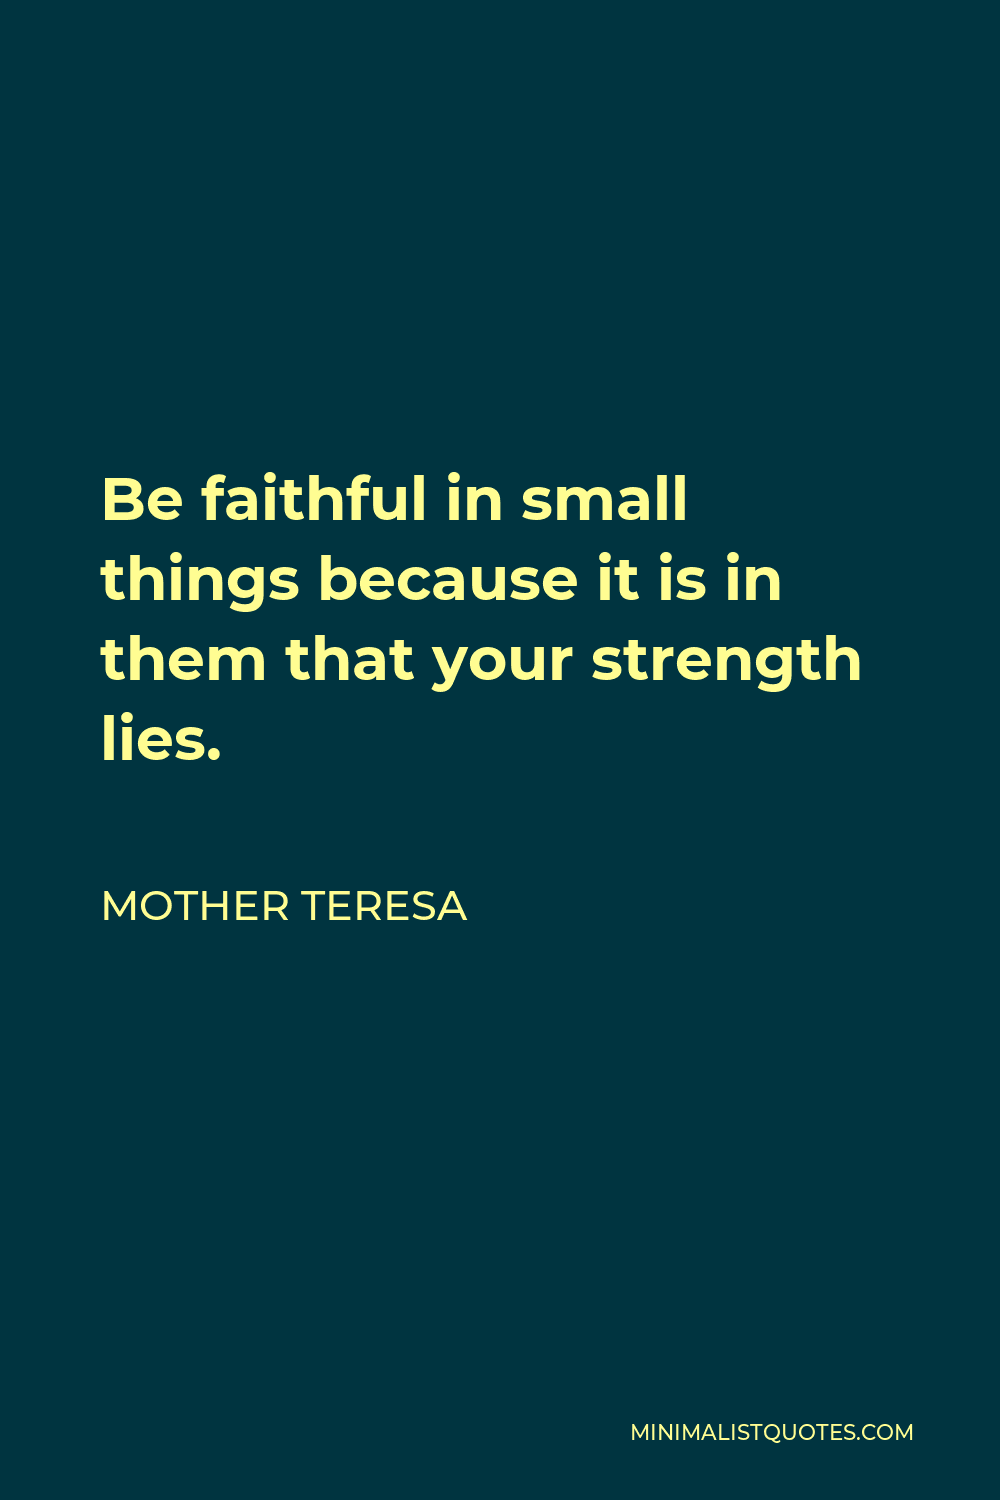 Mother Teresa Quote - Be faithful in small things because it is in them that your strength lies.